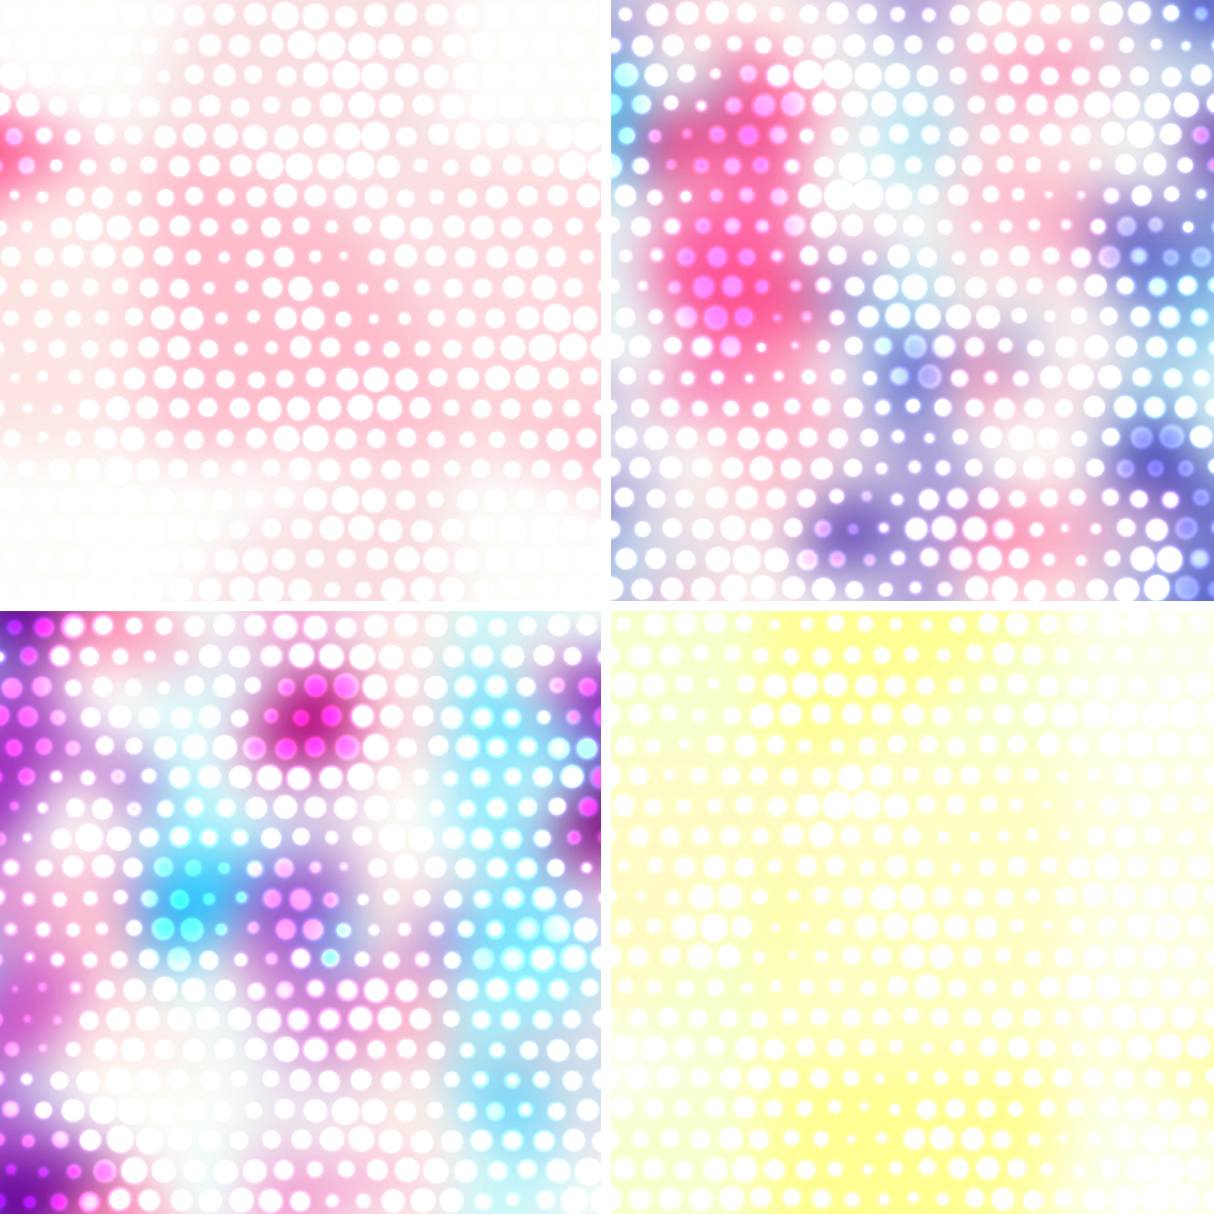 50 Shining Dotty Backgrounds Samples Preview – Part 9